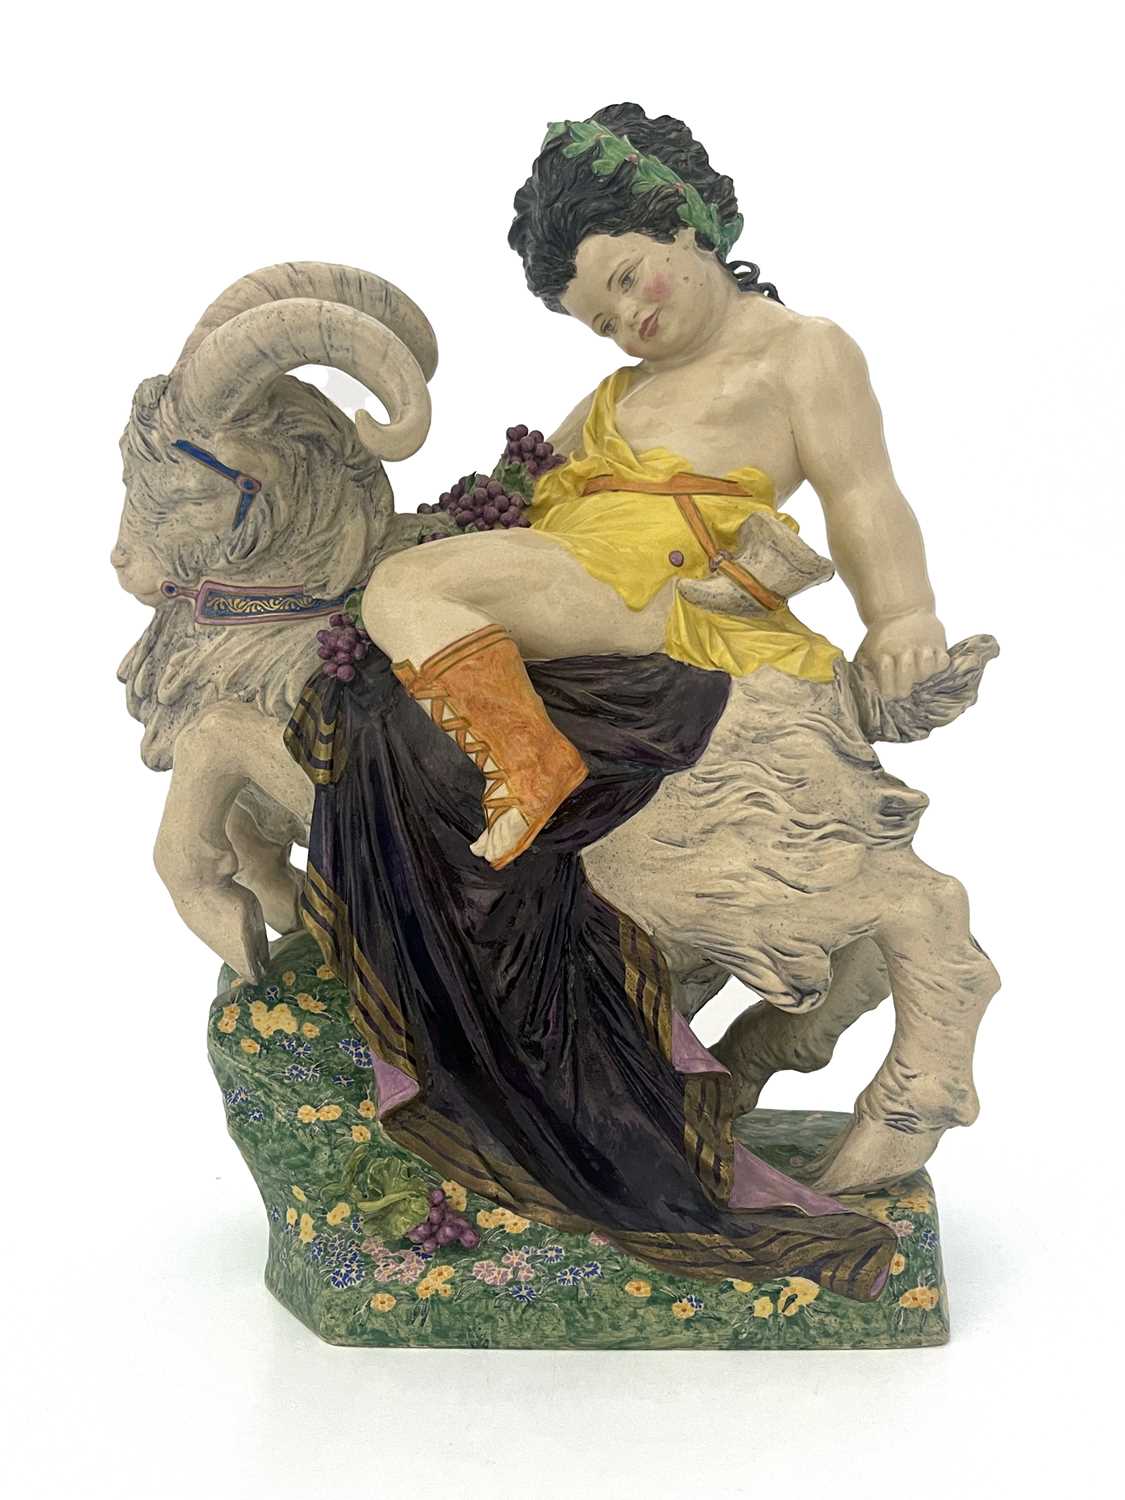 Charles Vyse for Chelsea Pottery, Bacchus on a Goat, 1921, modelled as a Classical boy on a - Image 7 of 9